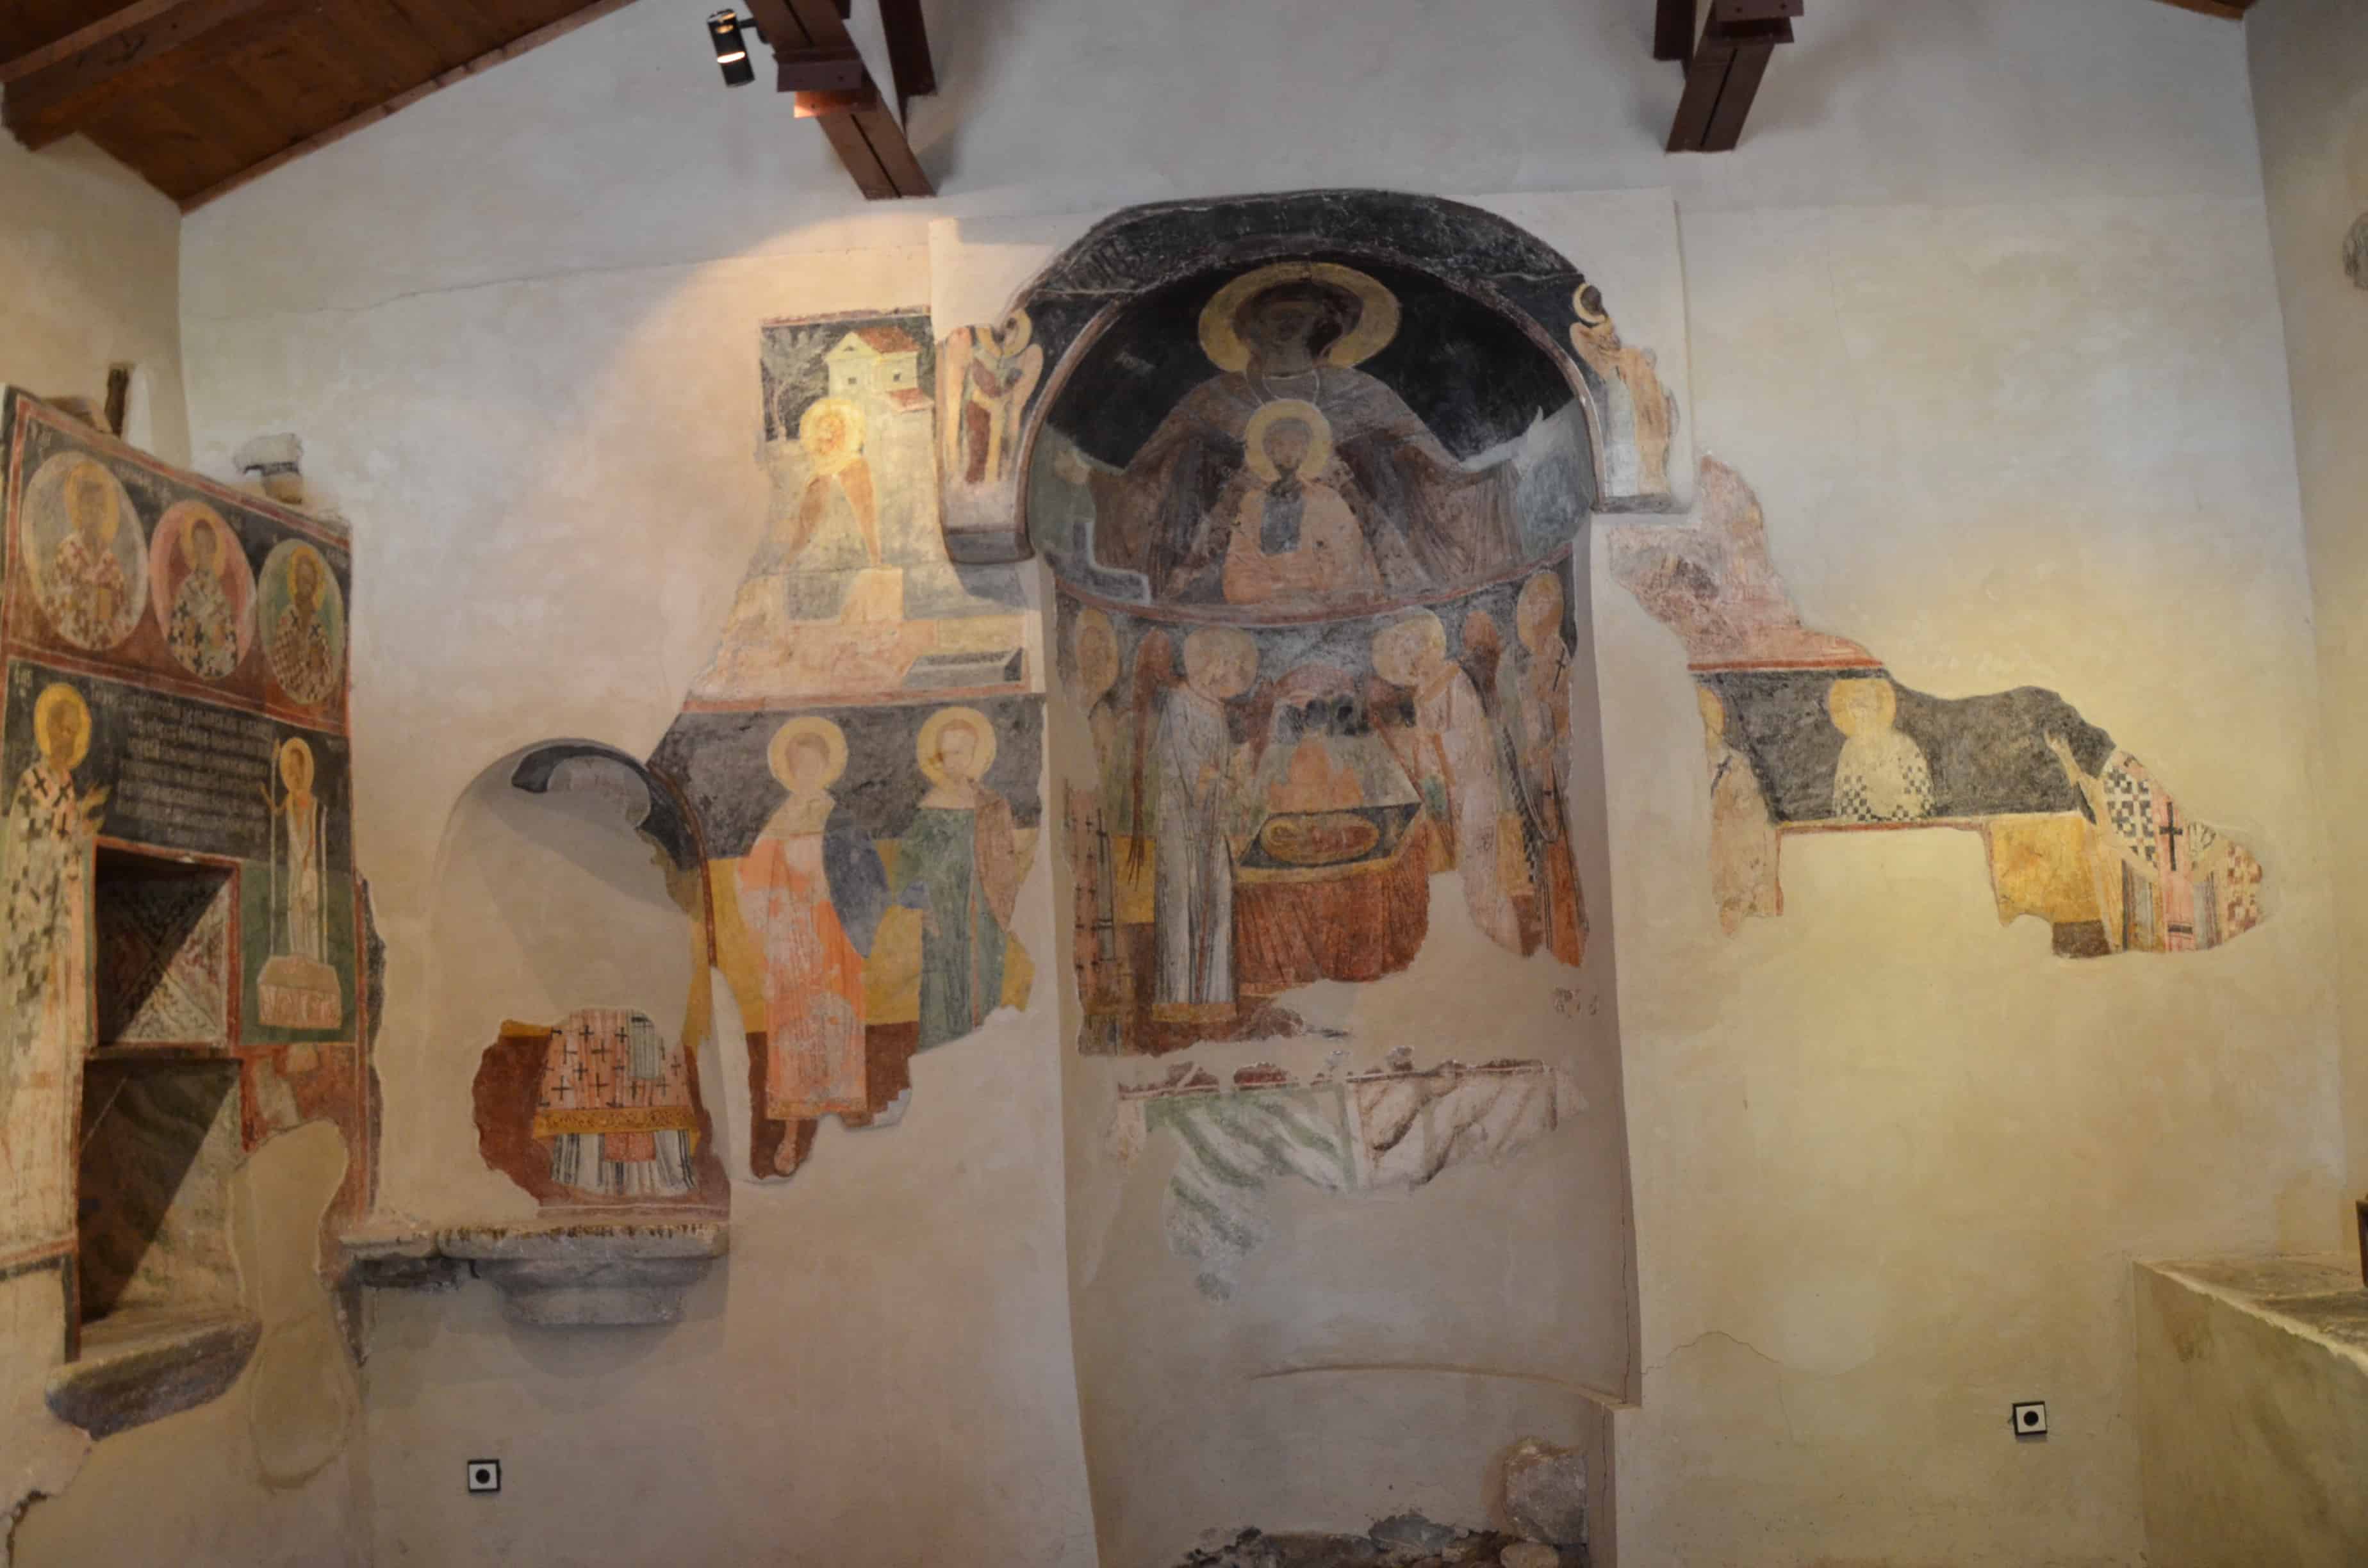 Partially damaged frescoes in the Church of the Holy Saviour in Nessebar, Bulgaria